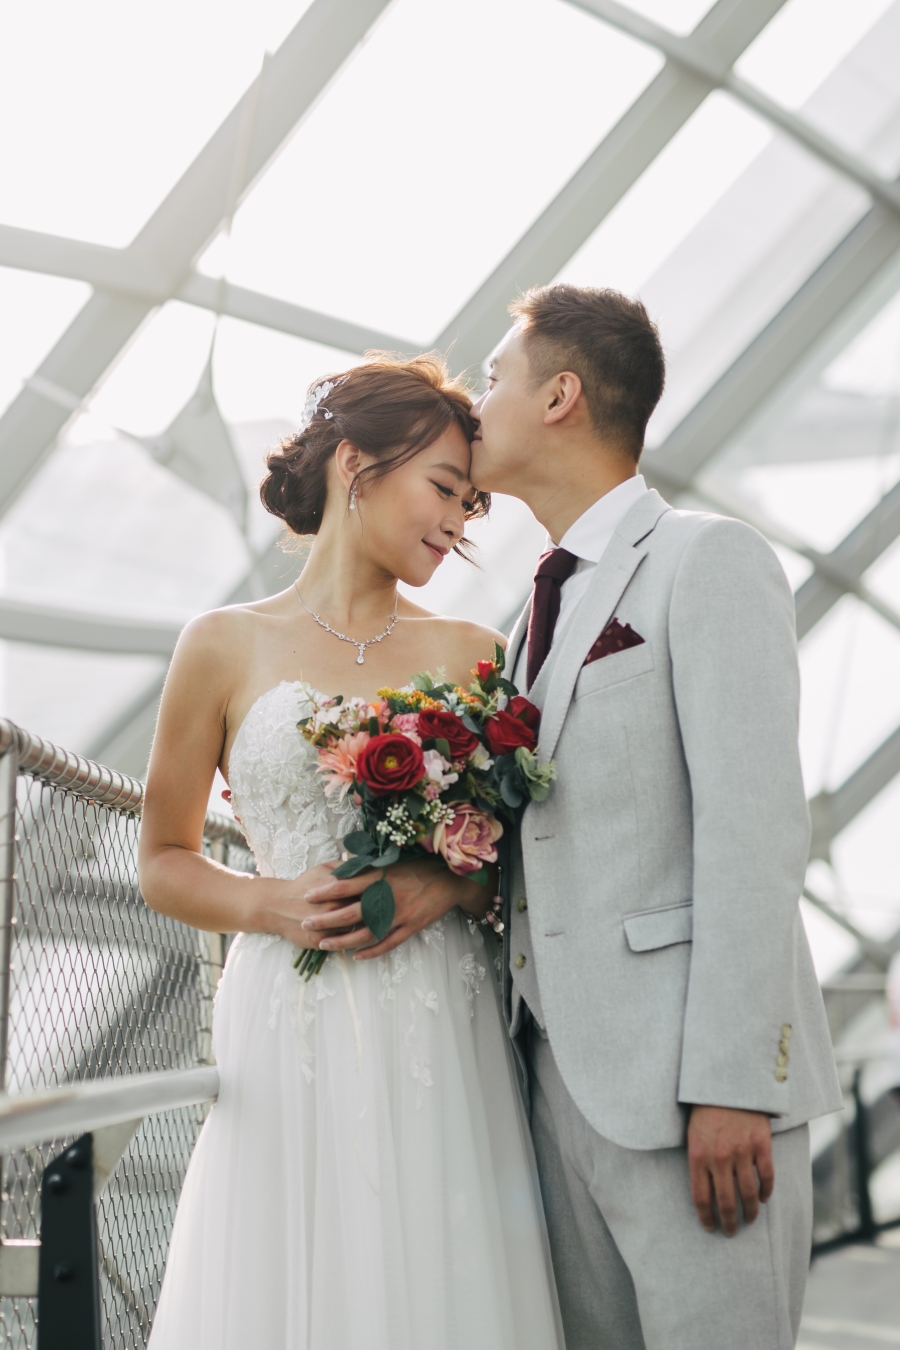 Singapore Pre-Wedding Photoshoot At Gardens By The Bay - Cloud Forest And Night Shoot At Marina Bay Sands by Cheng on OneThreeOneFour 11